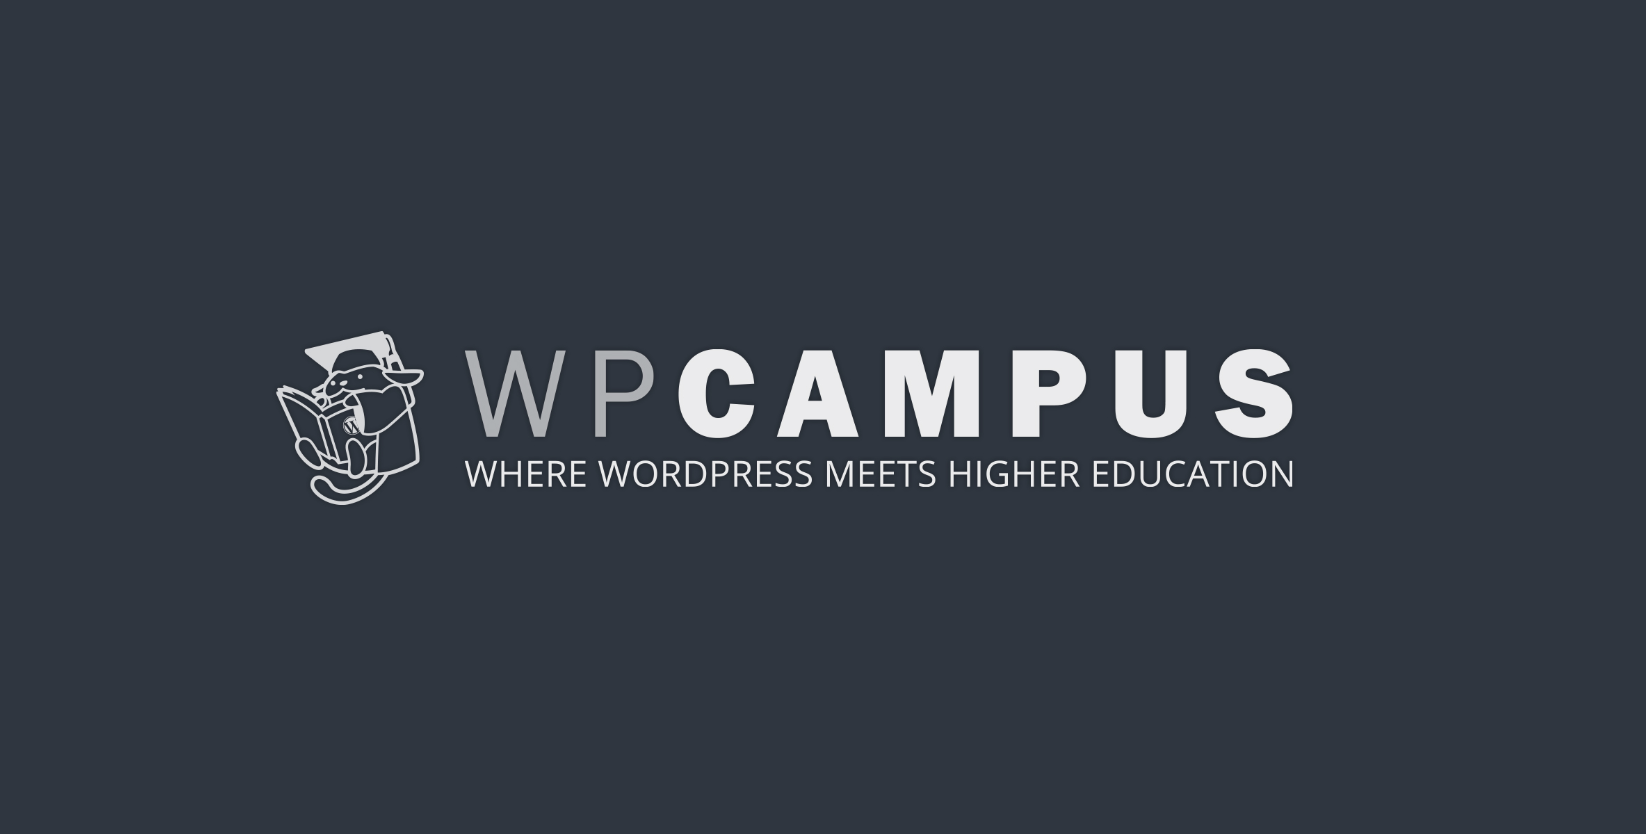 WPCampus 2019 to Livestream Sessions Thursday, July 25 – Saturday, July 27